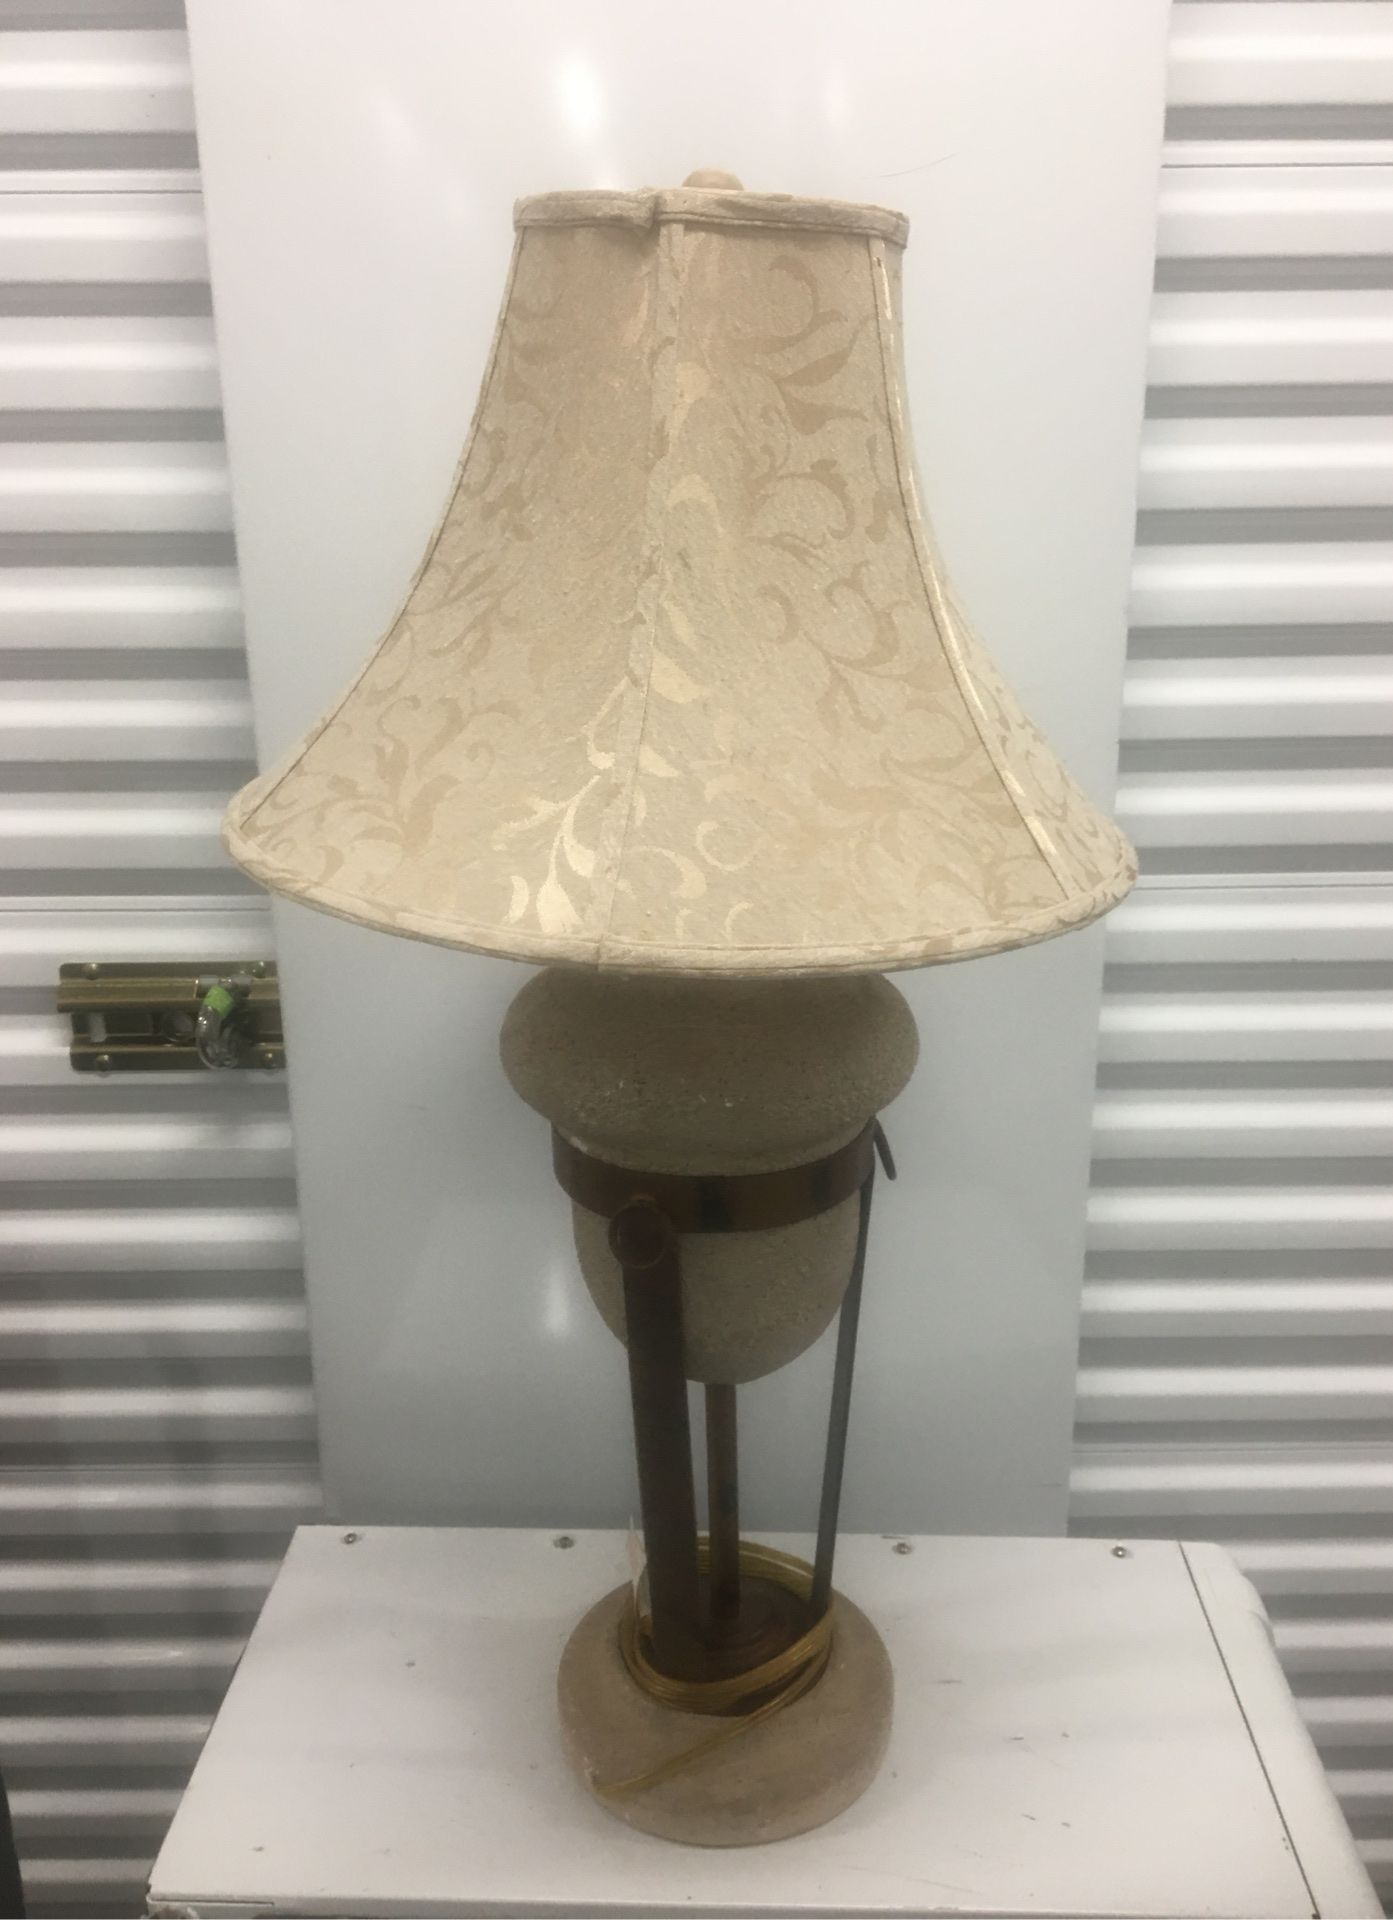 Nice decorative lamps for patio or family room Decor